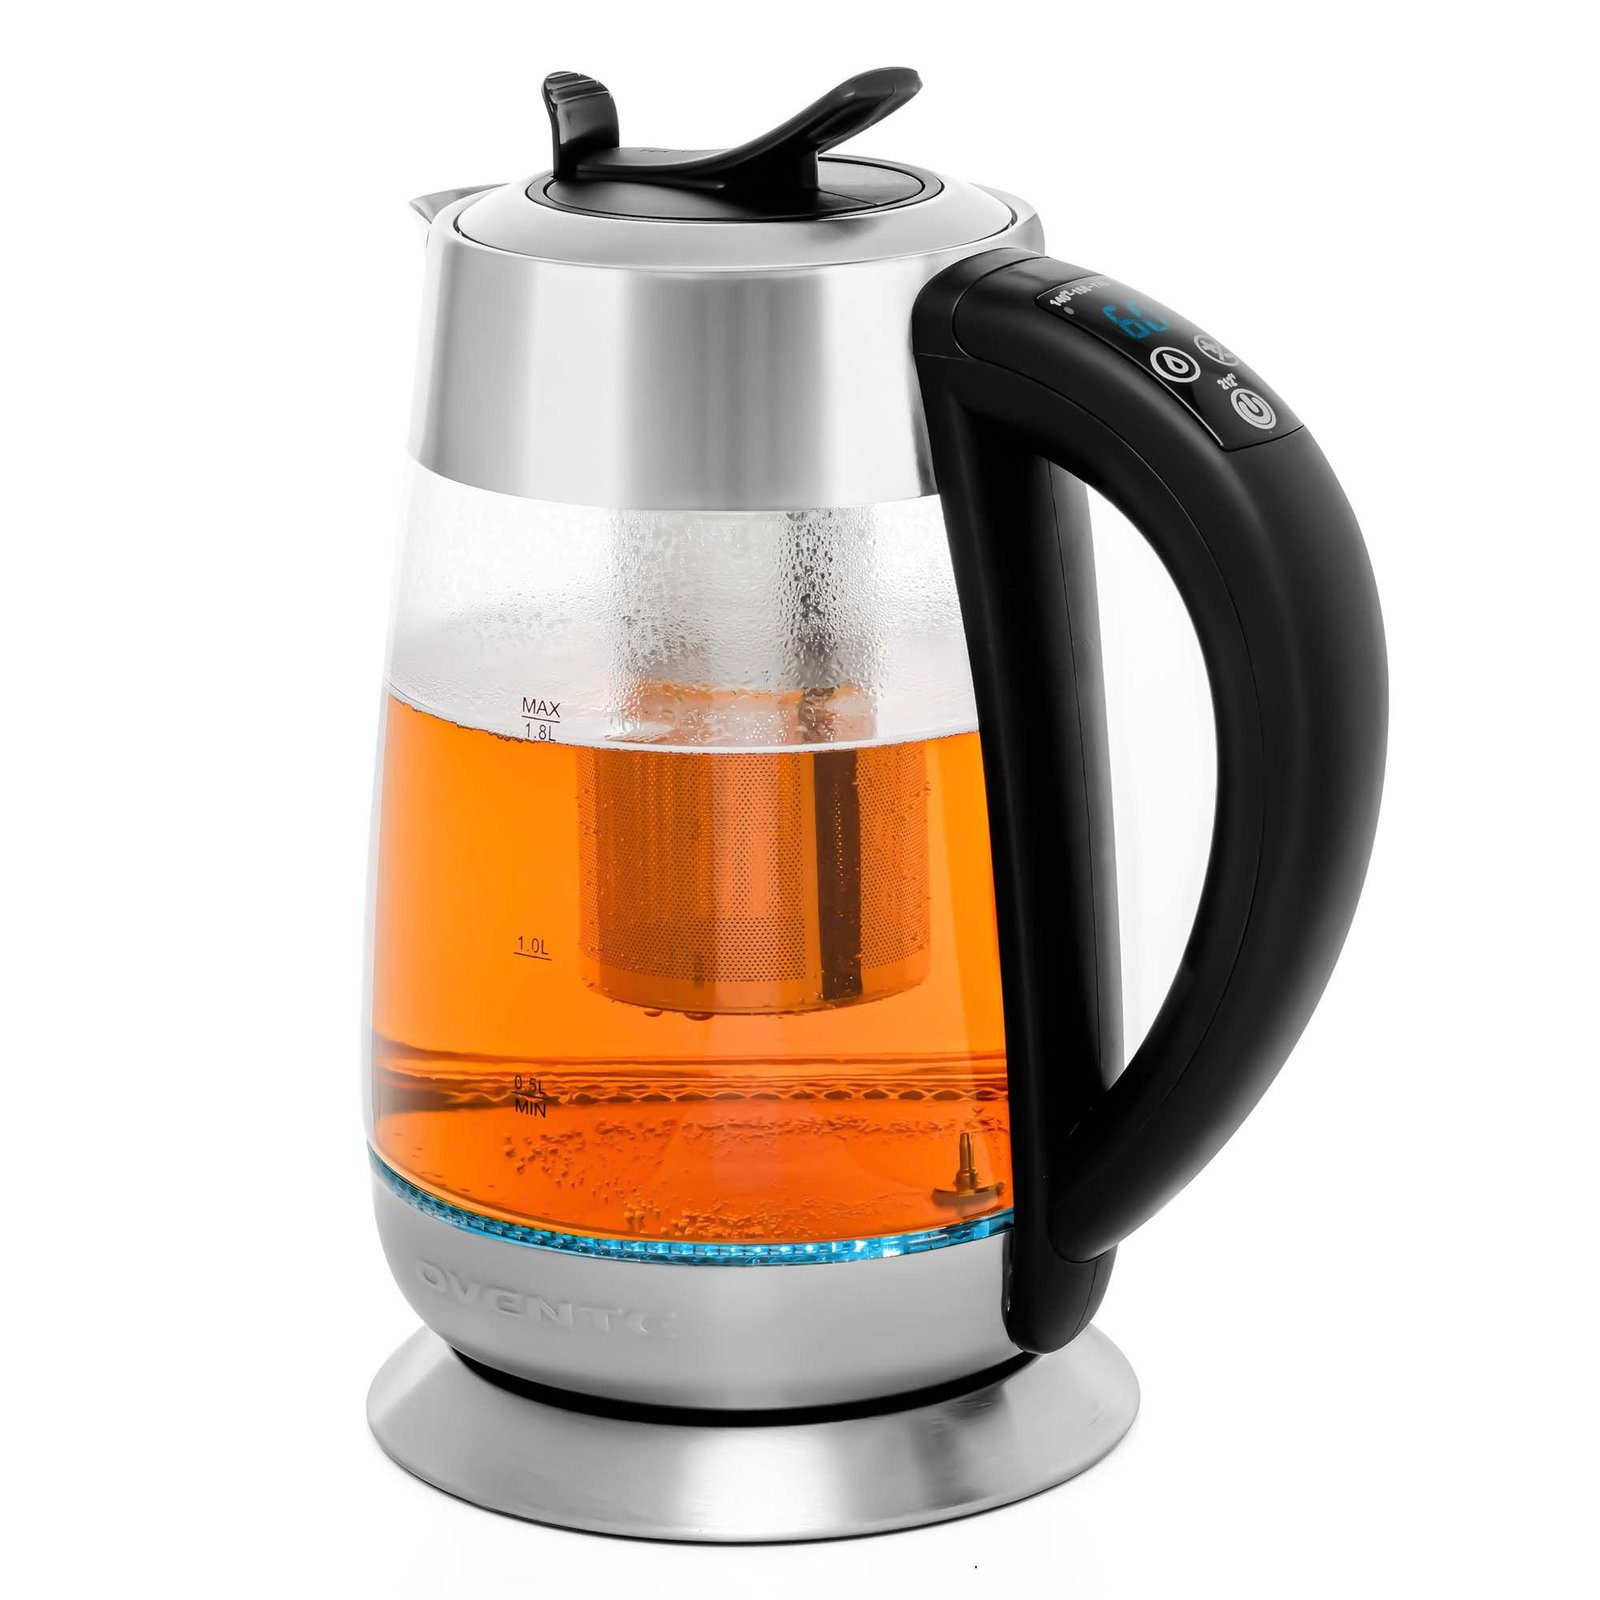 Glass Electric Kettle Boiling Water 1.8L 1500W Tea Infuser Keep